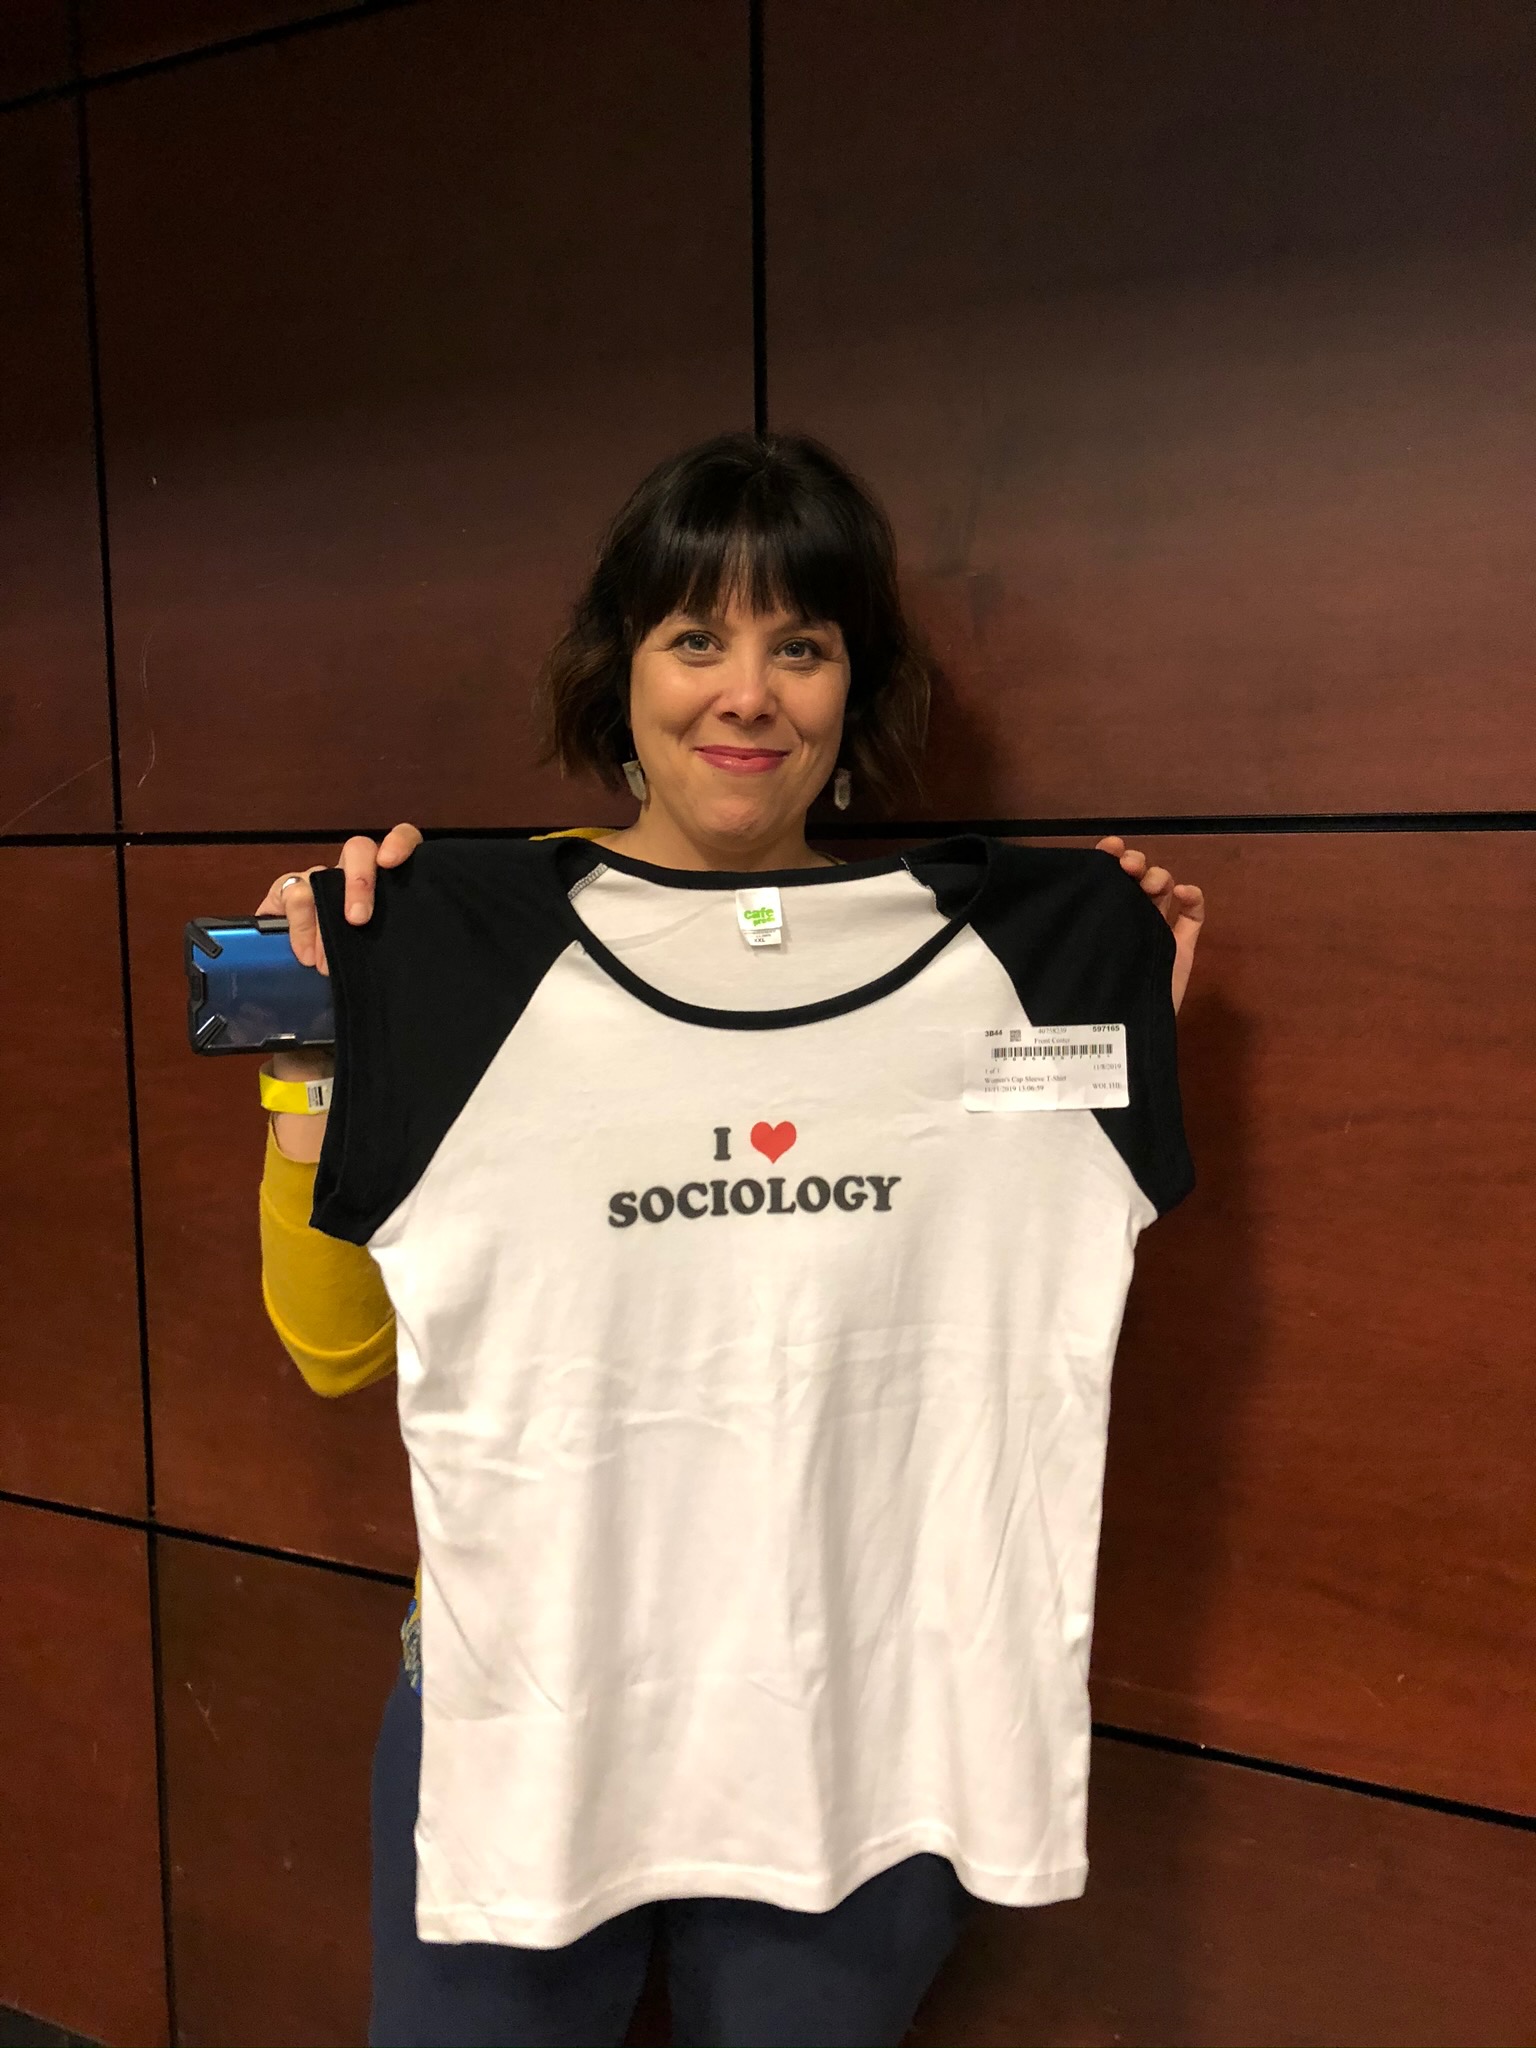  student holding a white and black t-shirt that they won in a raffle.